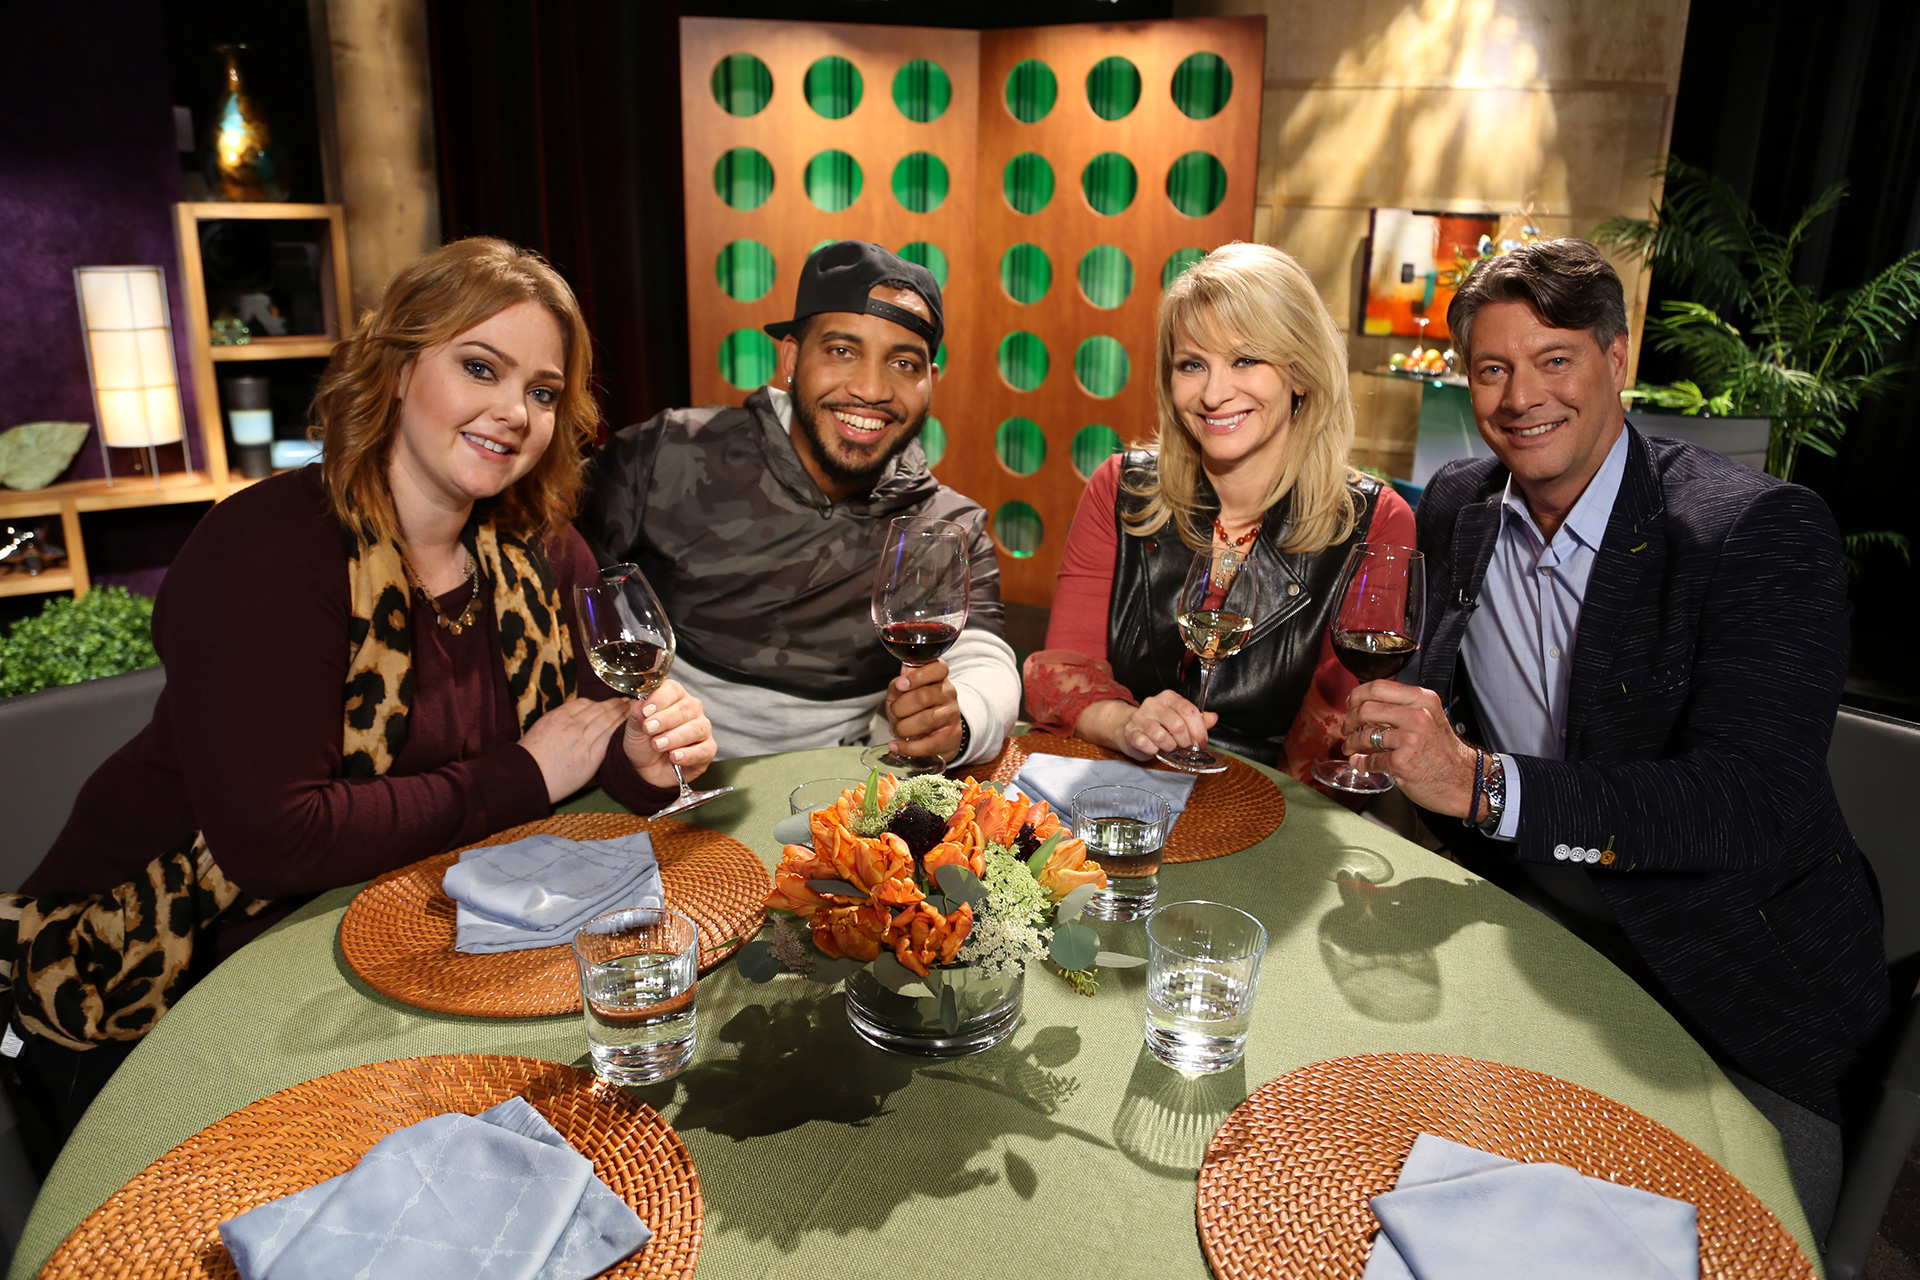 Host Leslie Sbrocco and guests on the set of season 13 episode 3.